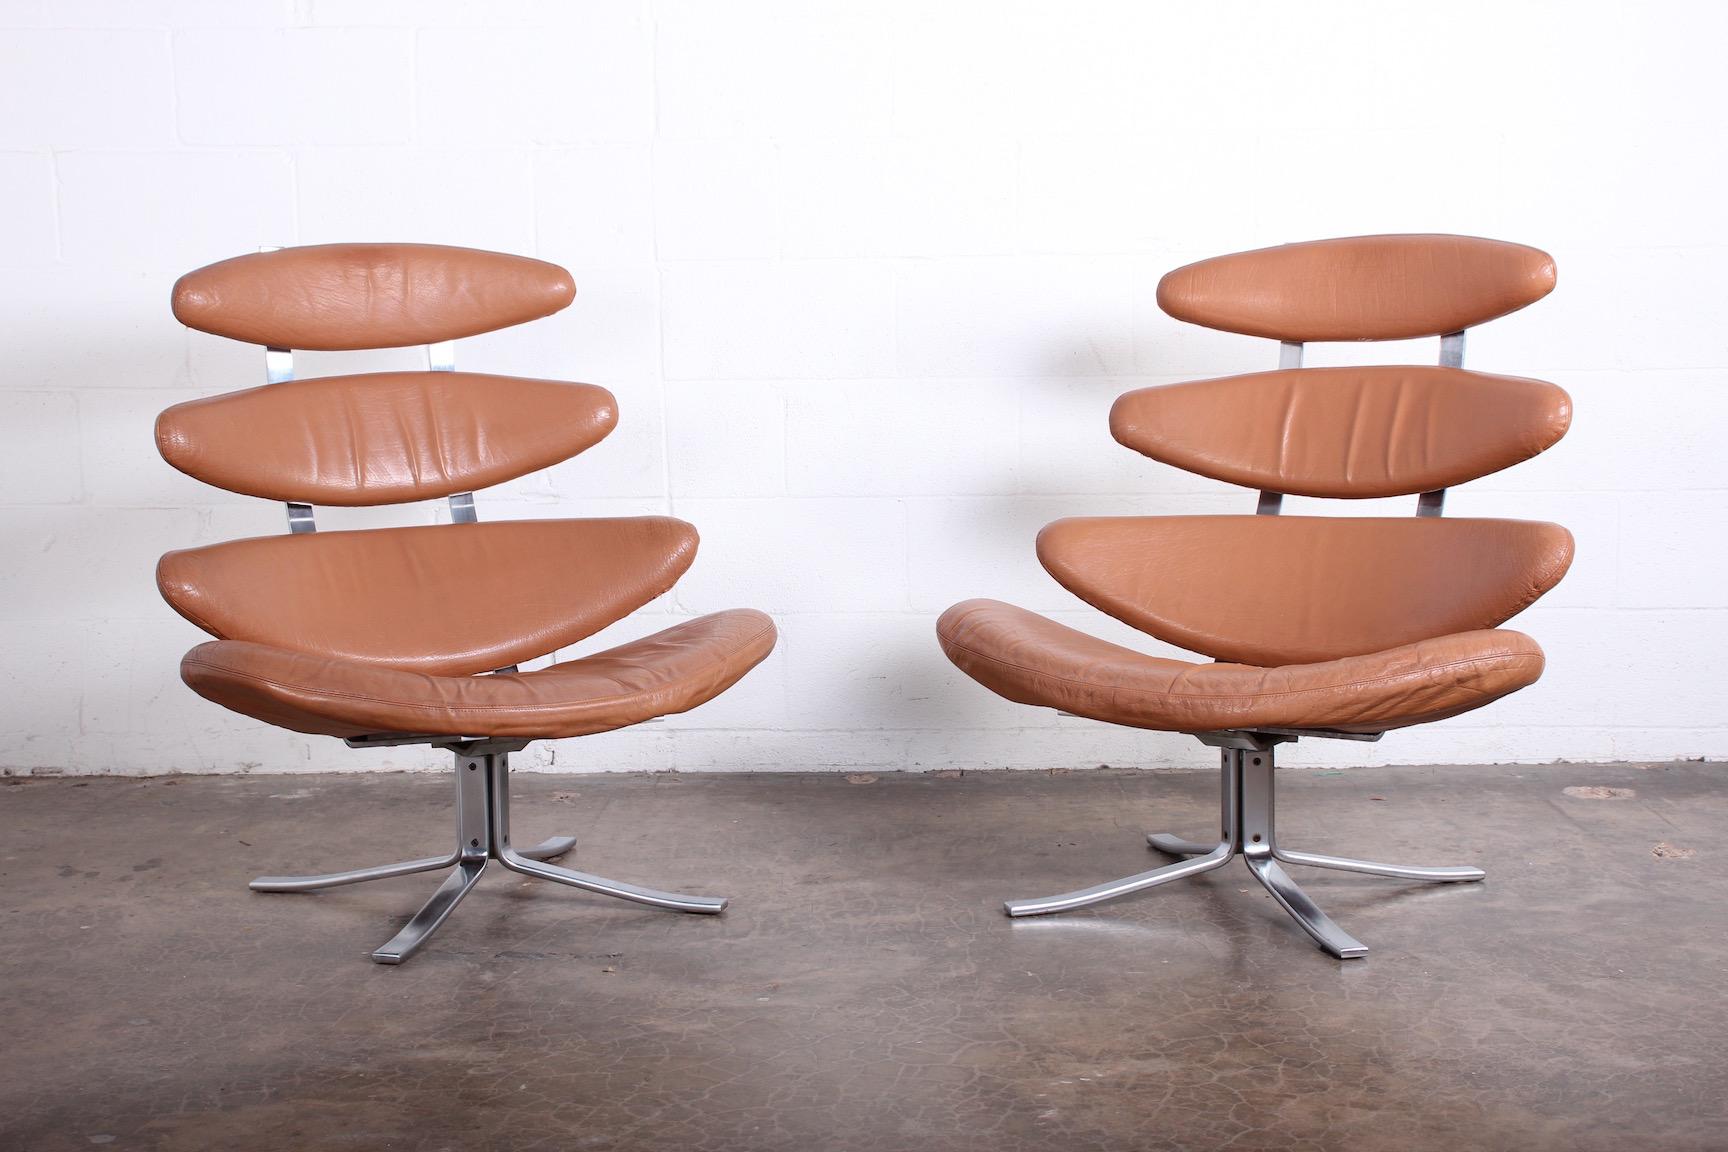 A pair of swiveling Corona chairs by Paul Volther for Erik Jørgensen in original leather.